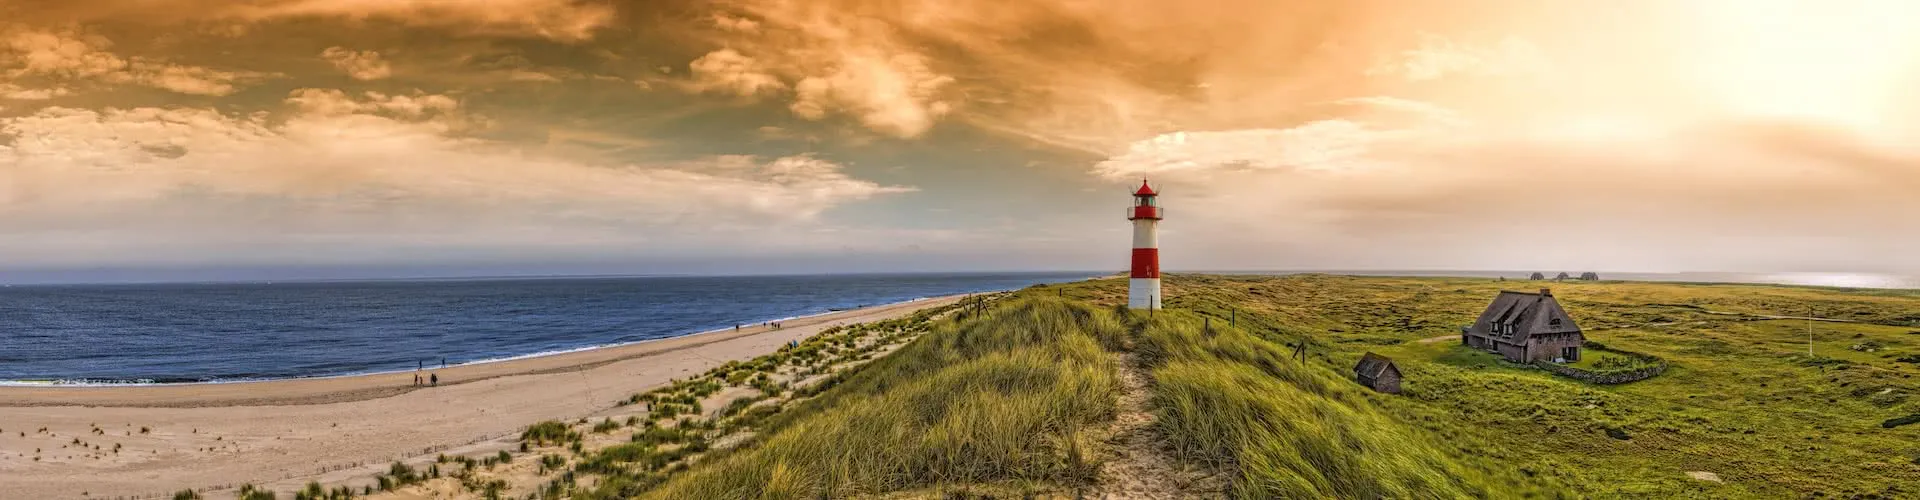 Sylt - the destination for workers